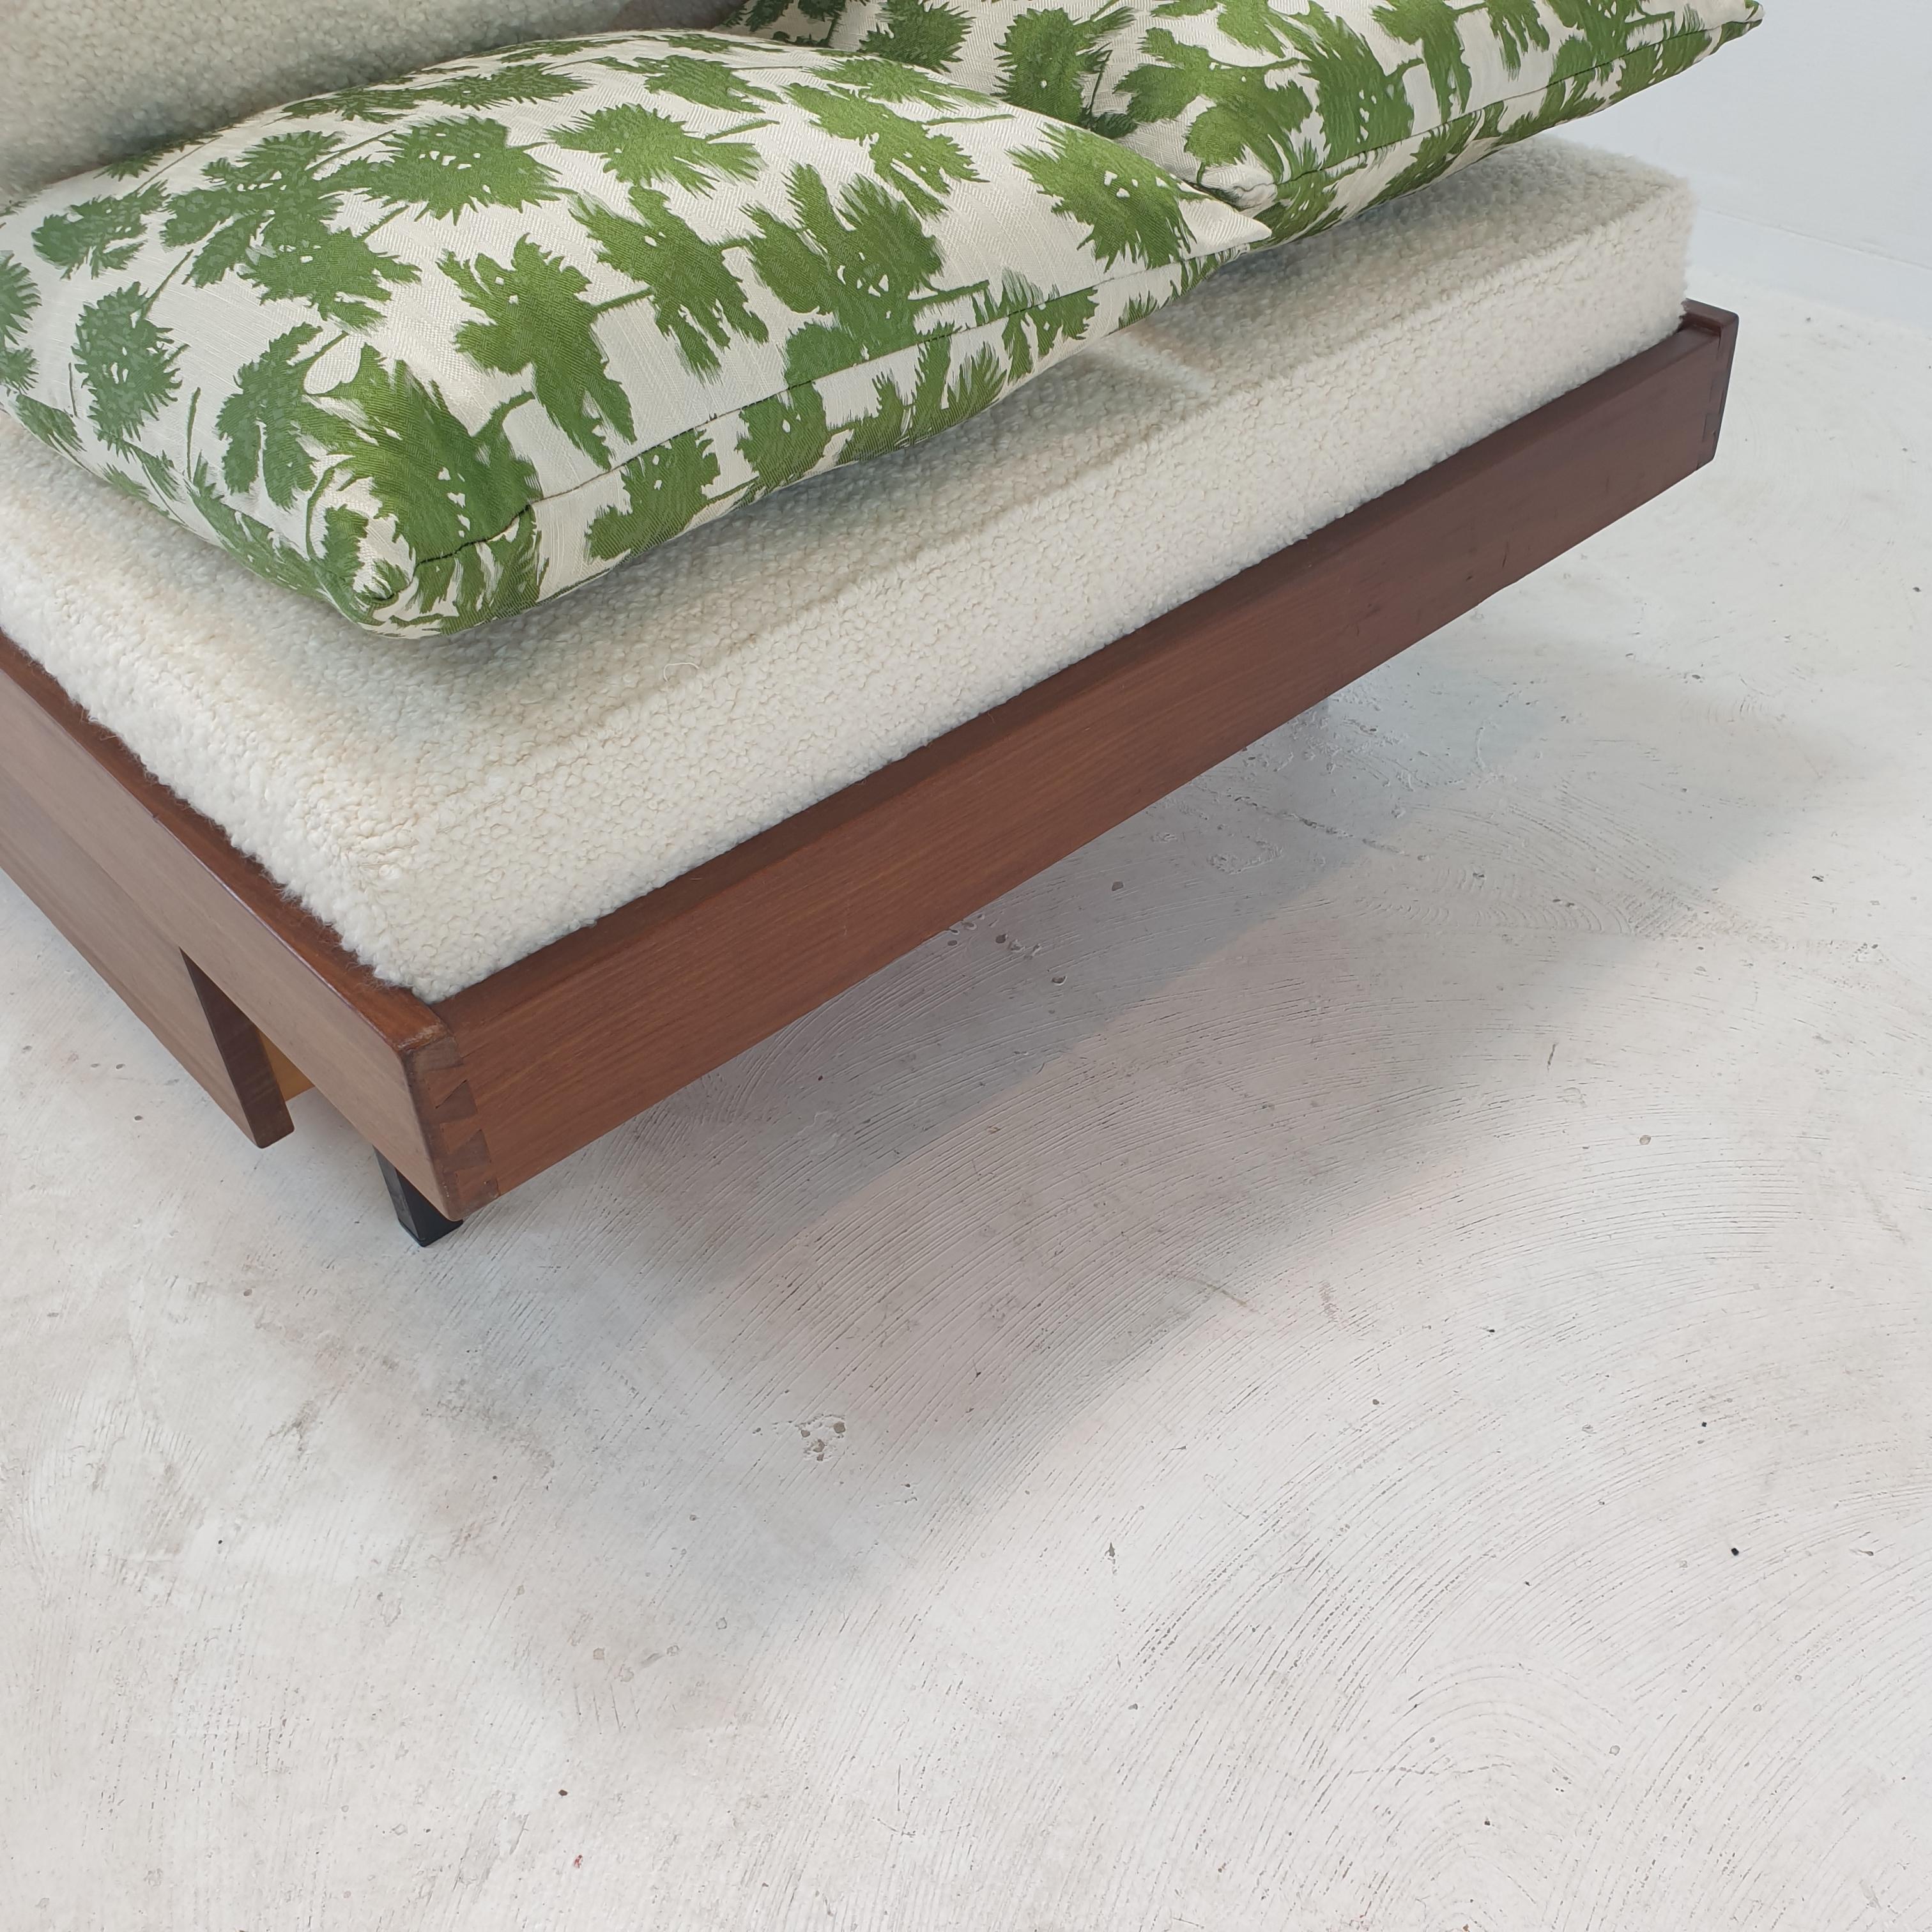 Teak Daybed with Dedar Cushions and Bolster, 1960s For Sale 6